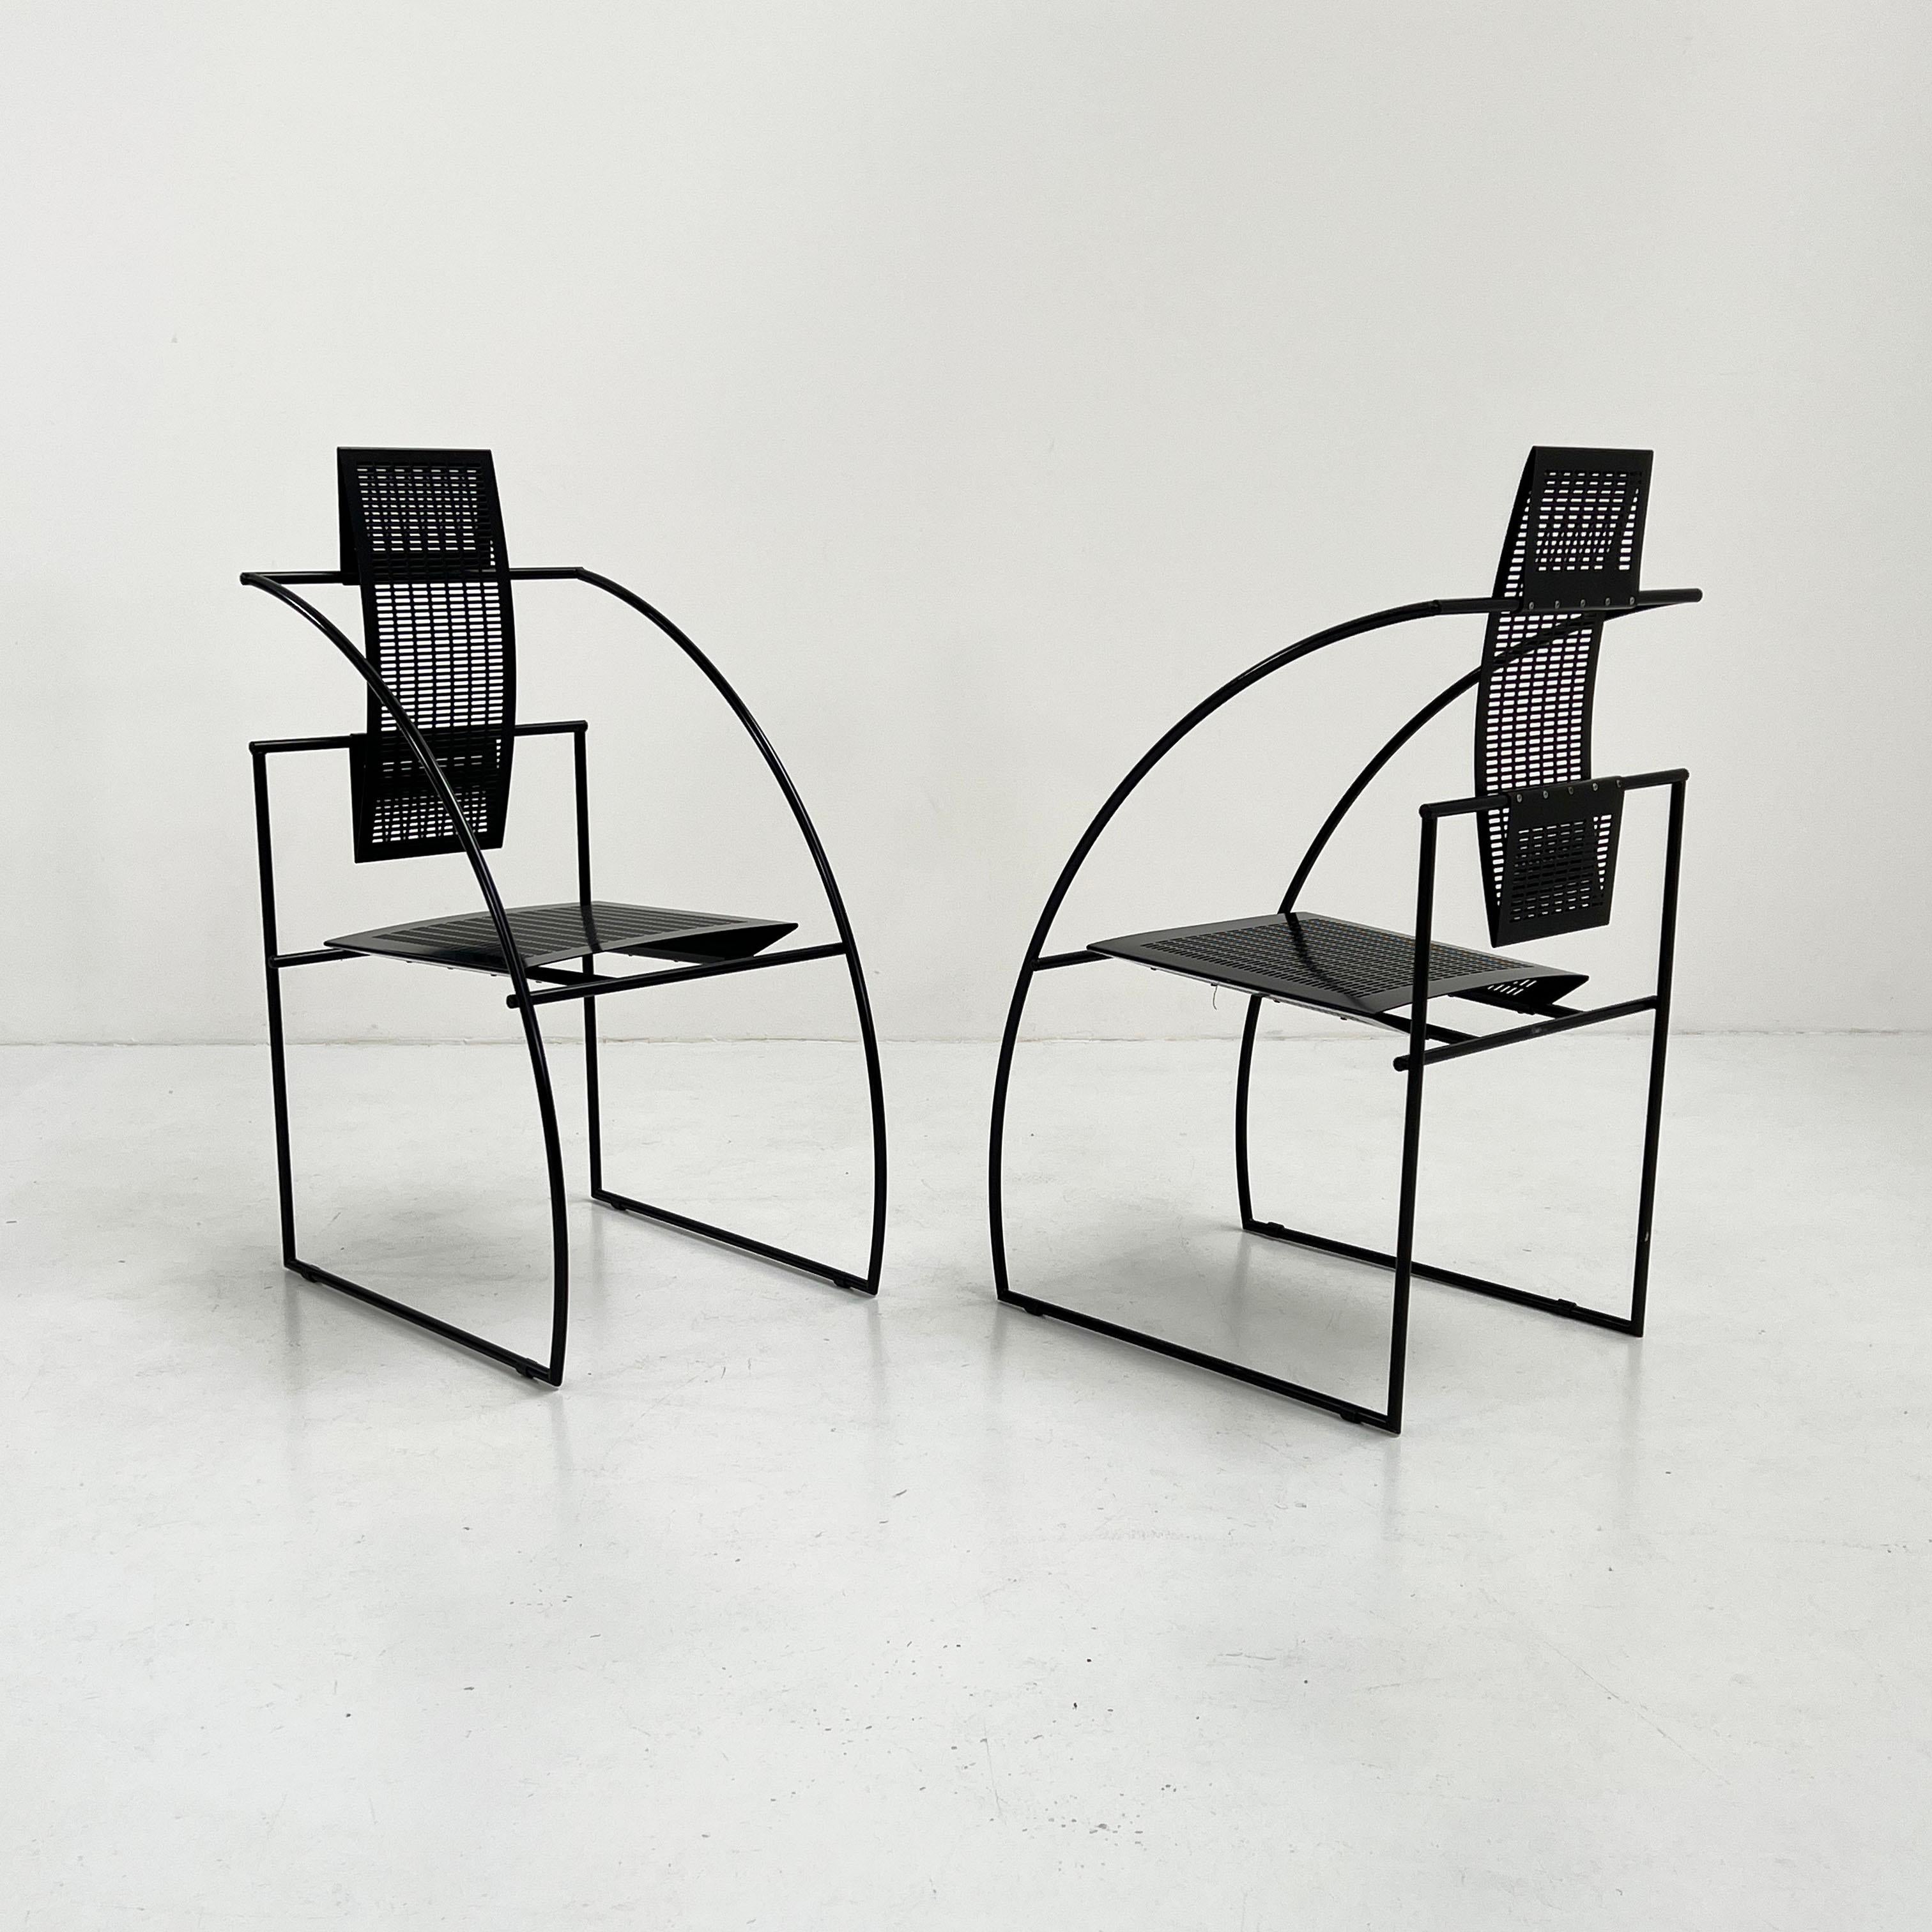 Quinta Chair by Mario Botta for Alias, 1980s For Sale 4